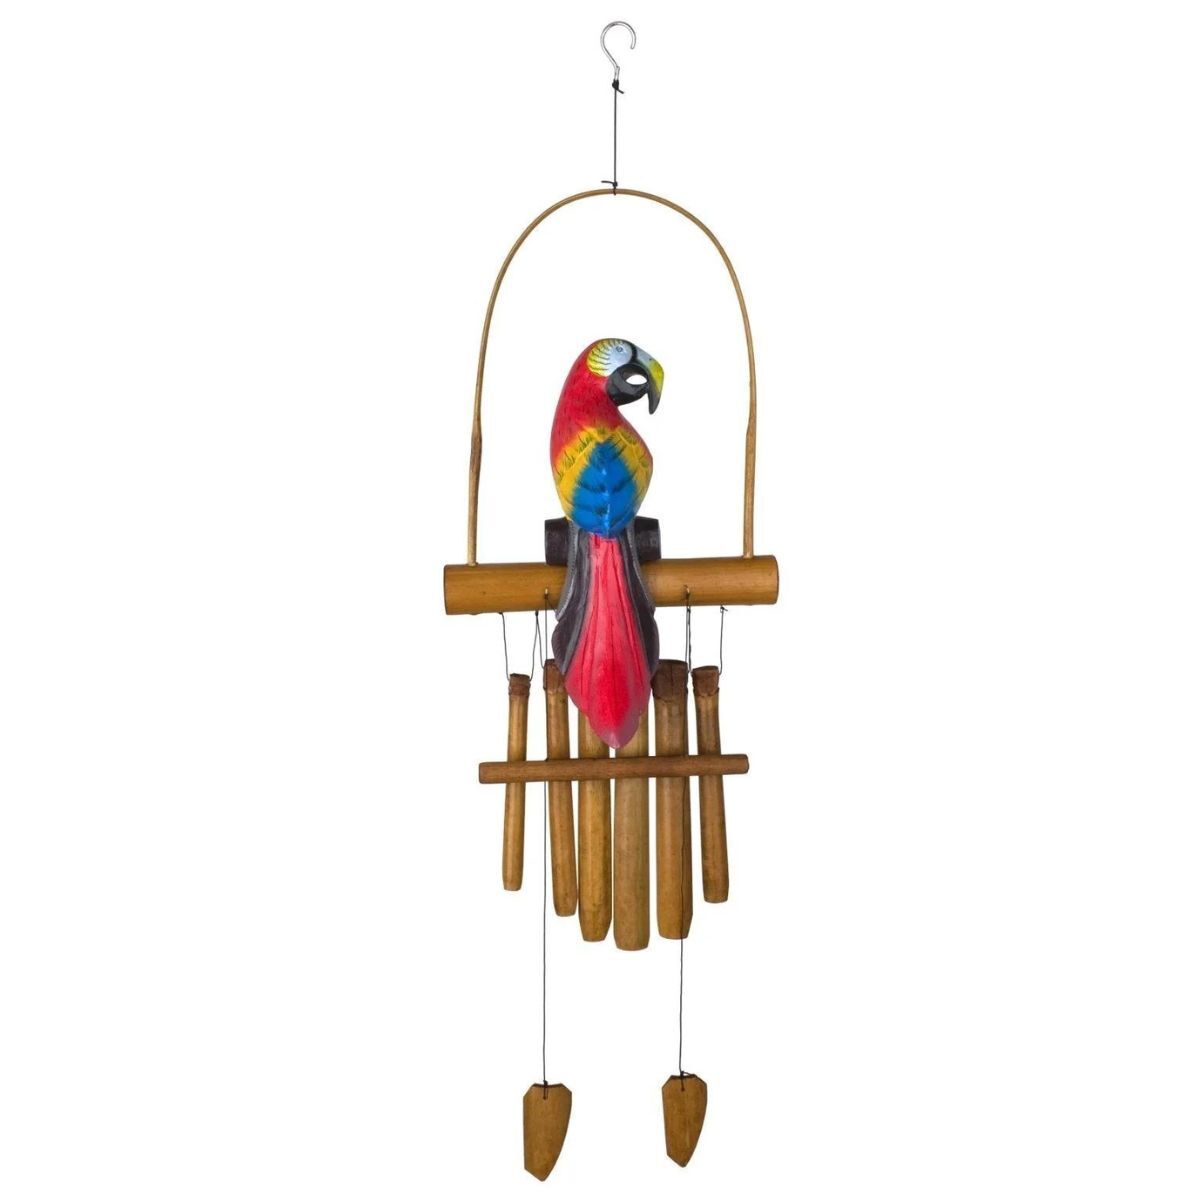 Woodstock Percussion 36 Inch Animal Chime - Parrot